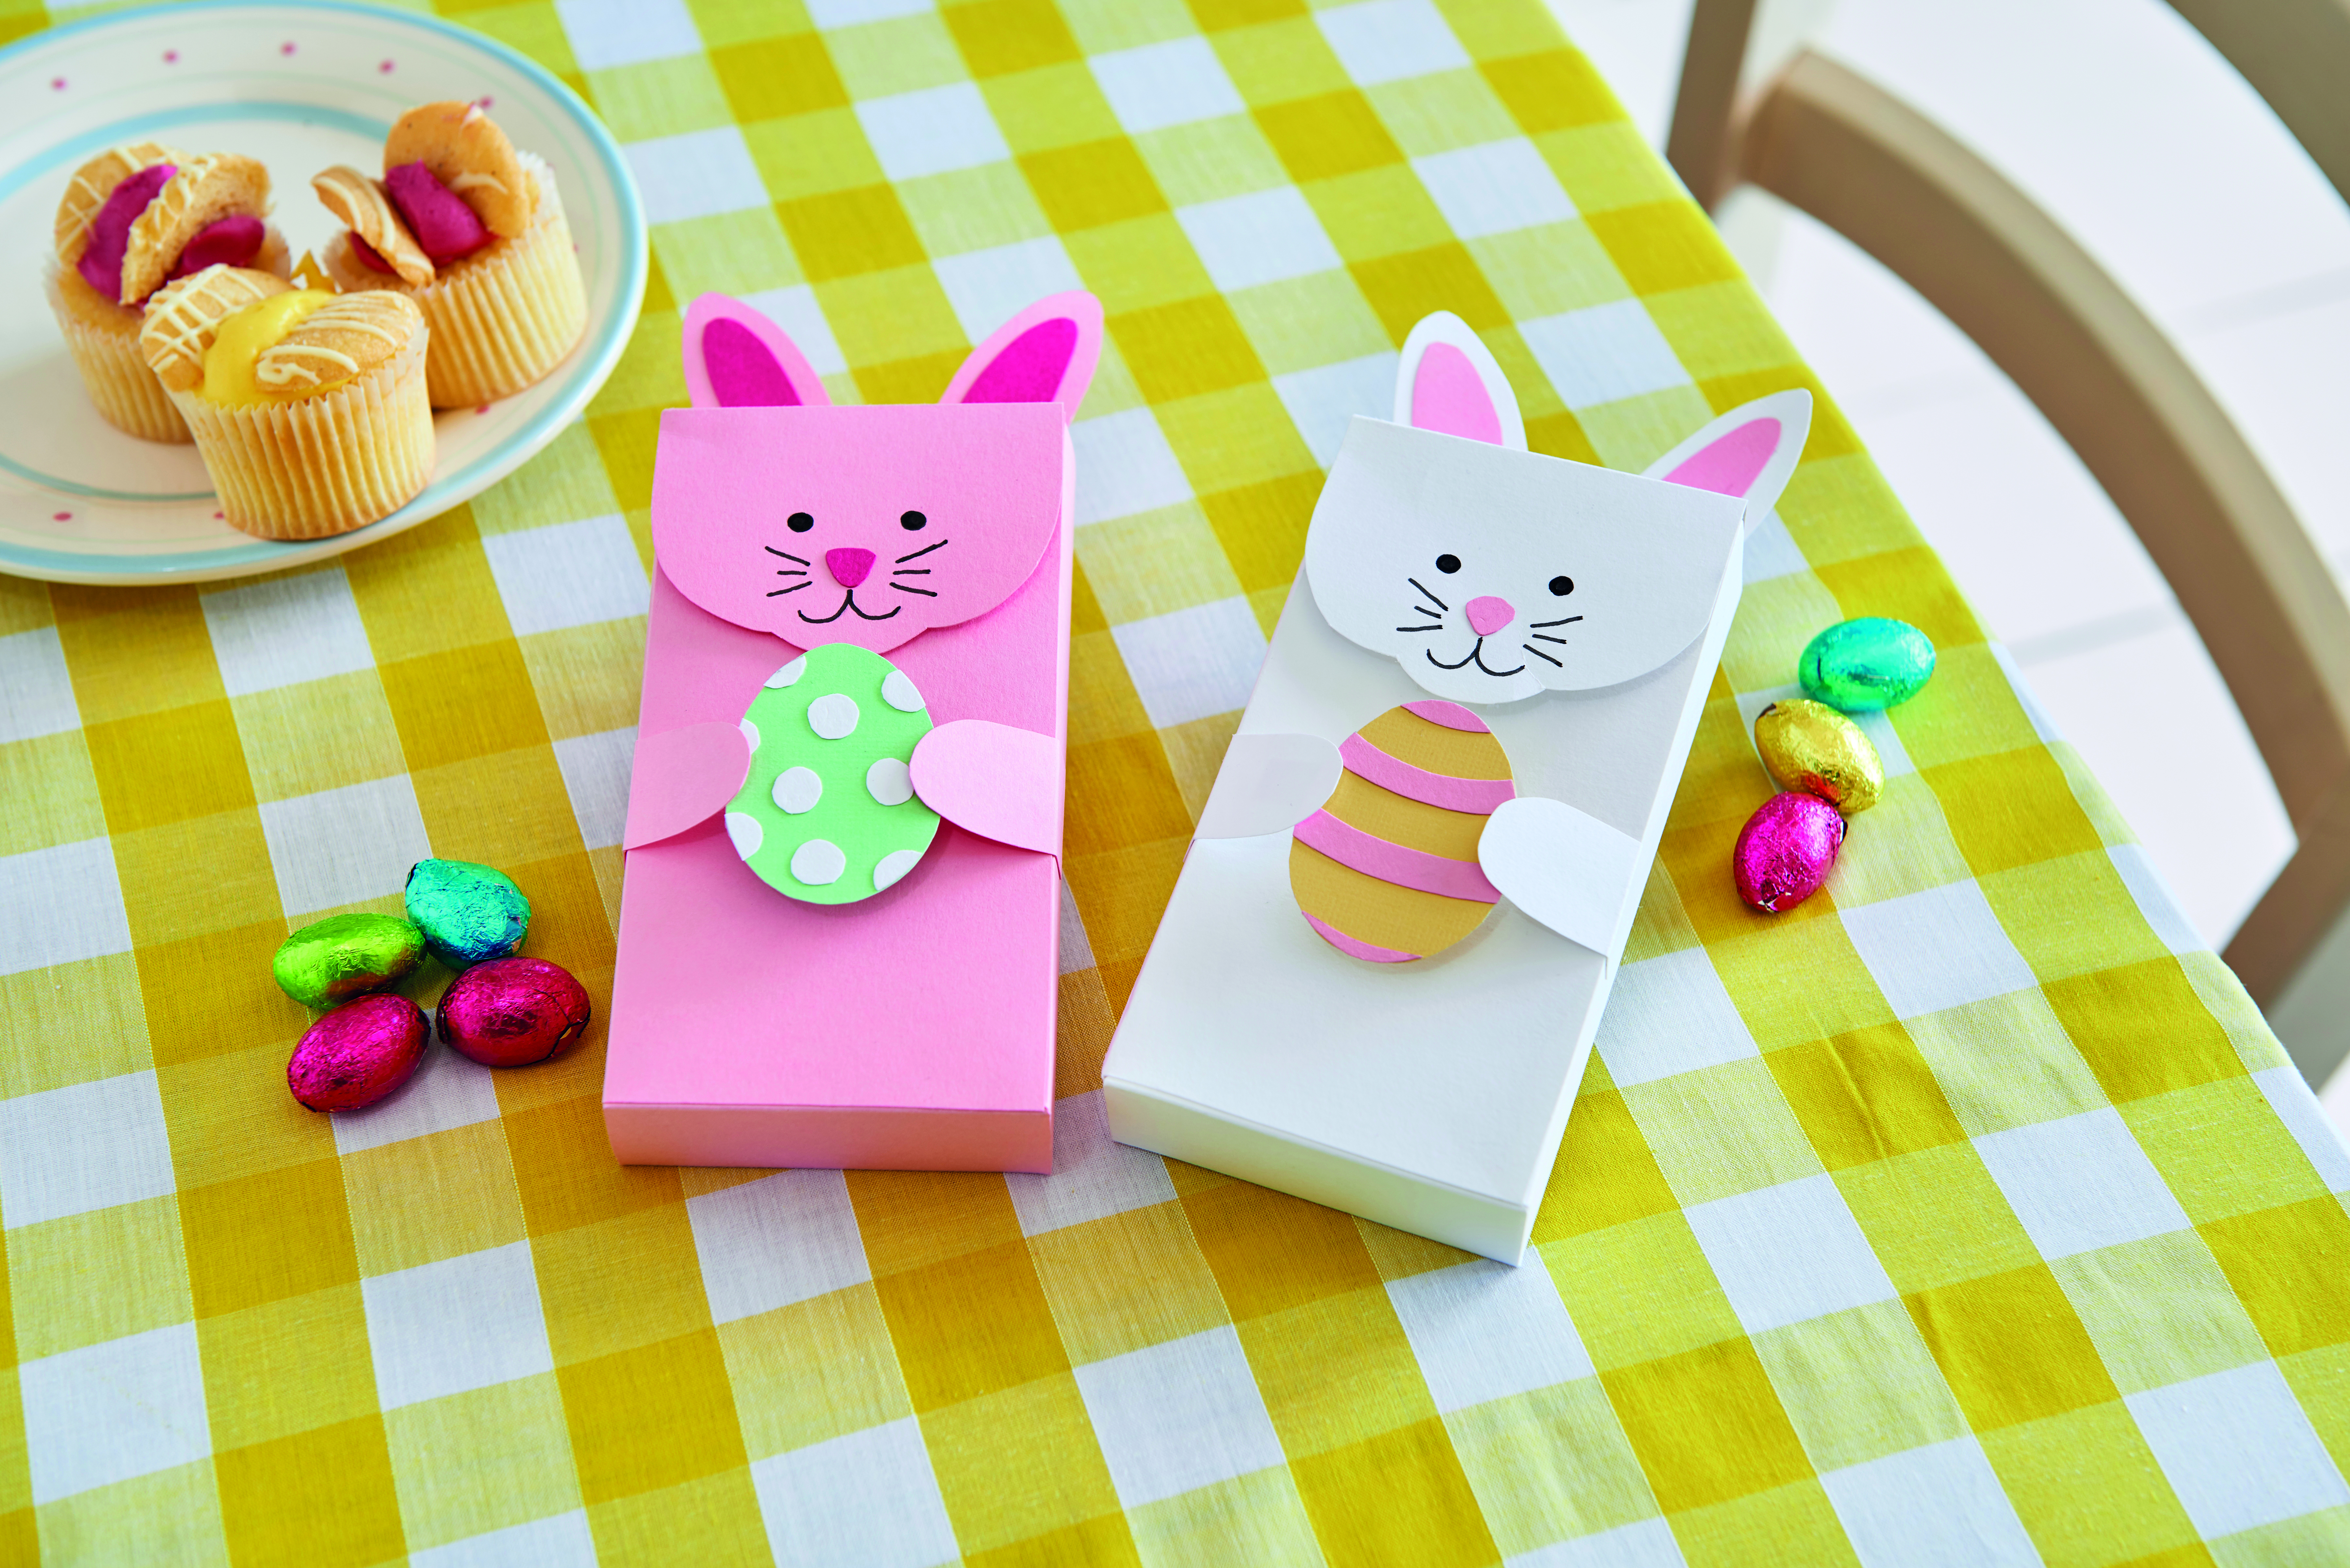 Easy Easter craft activity ideas – treat boxes